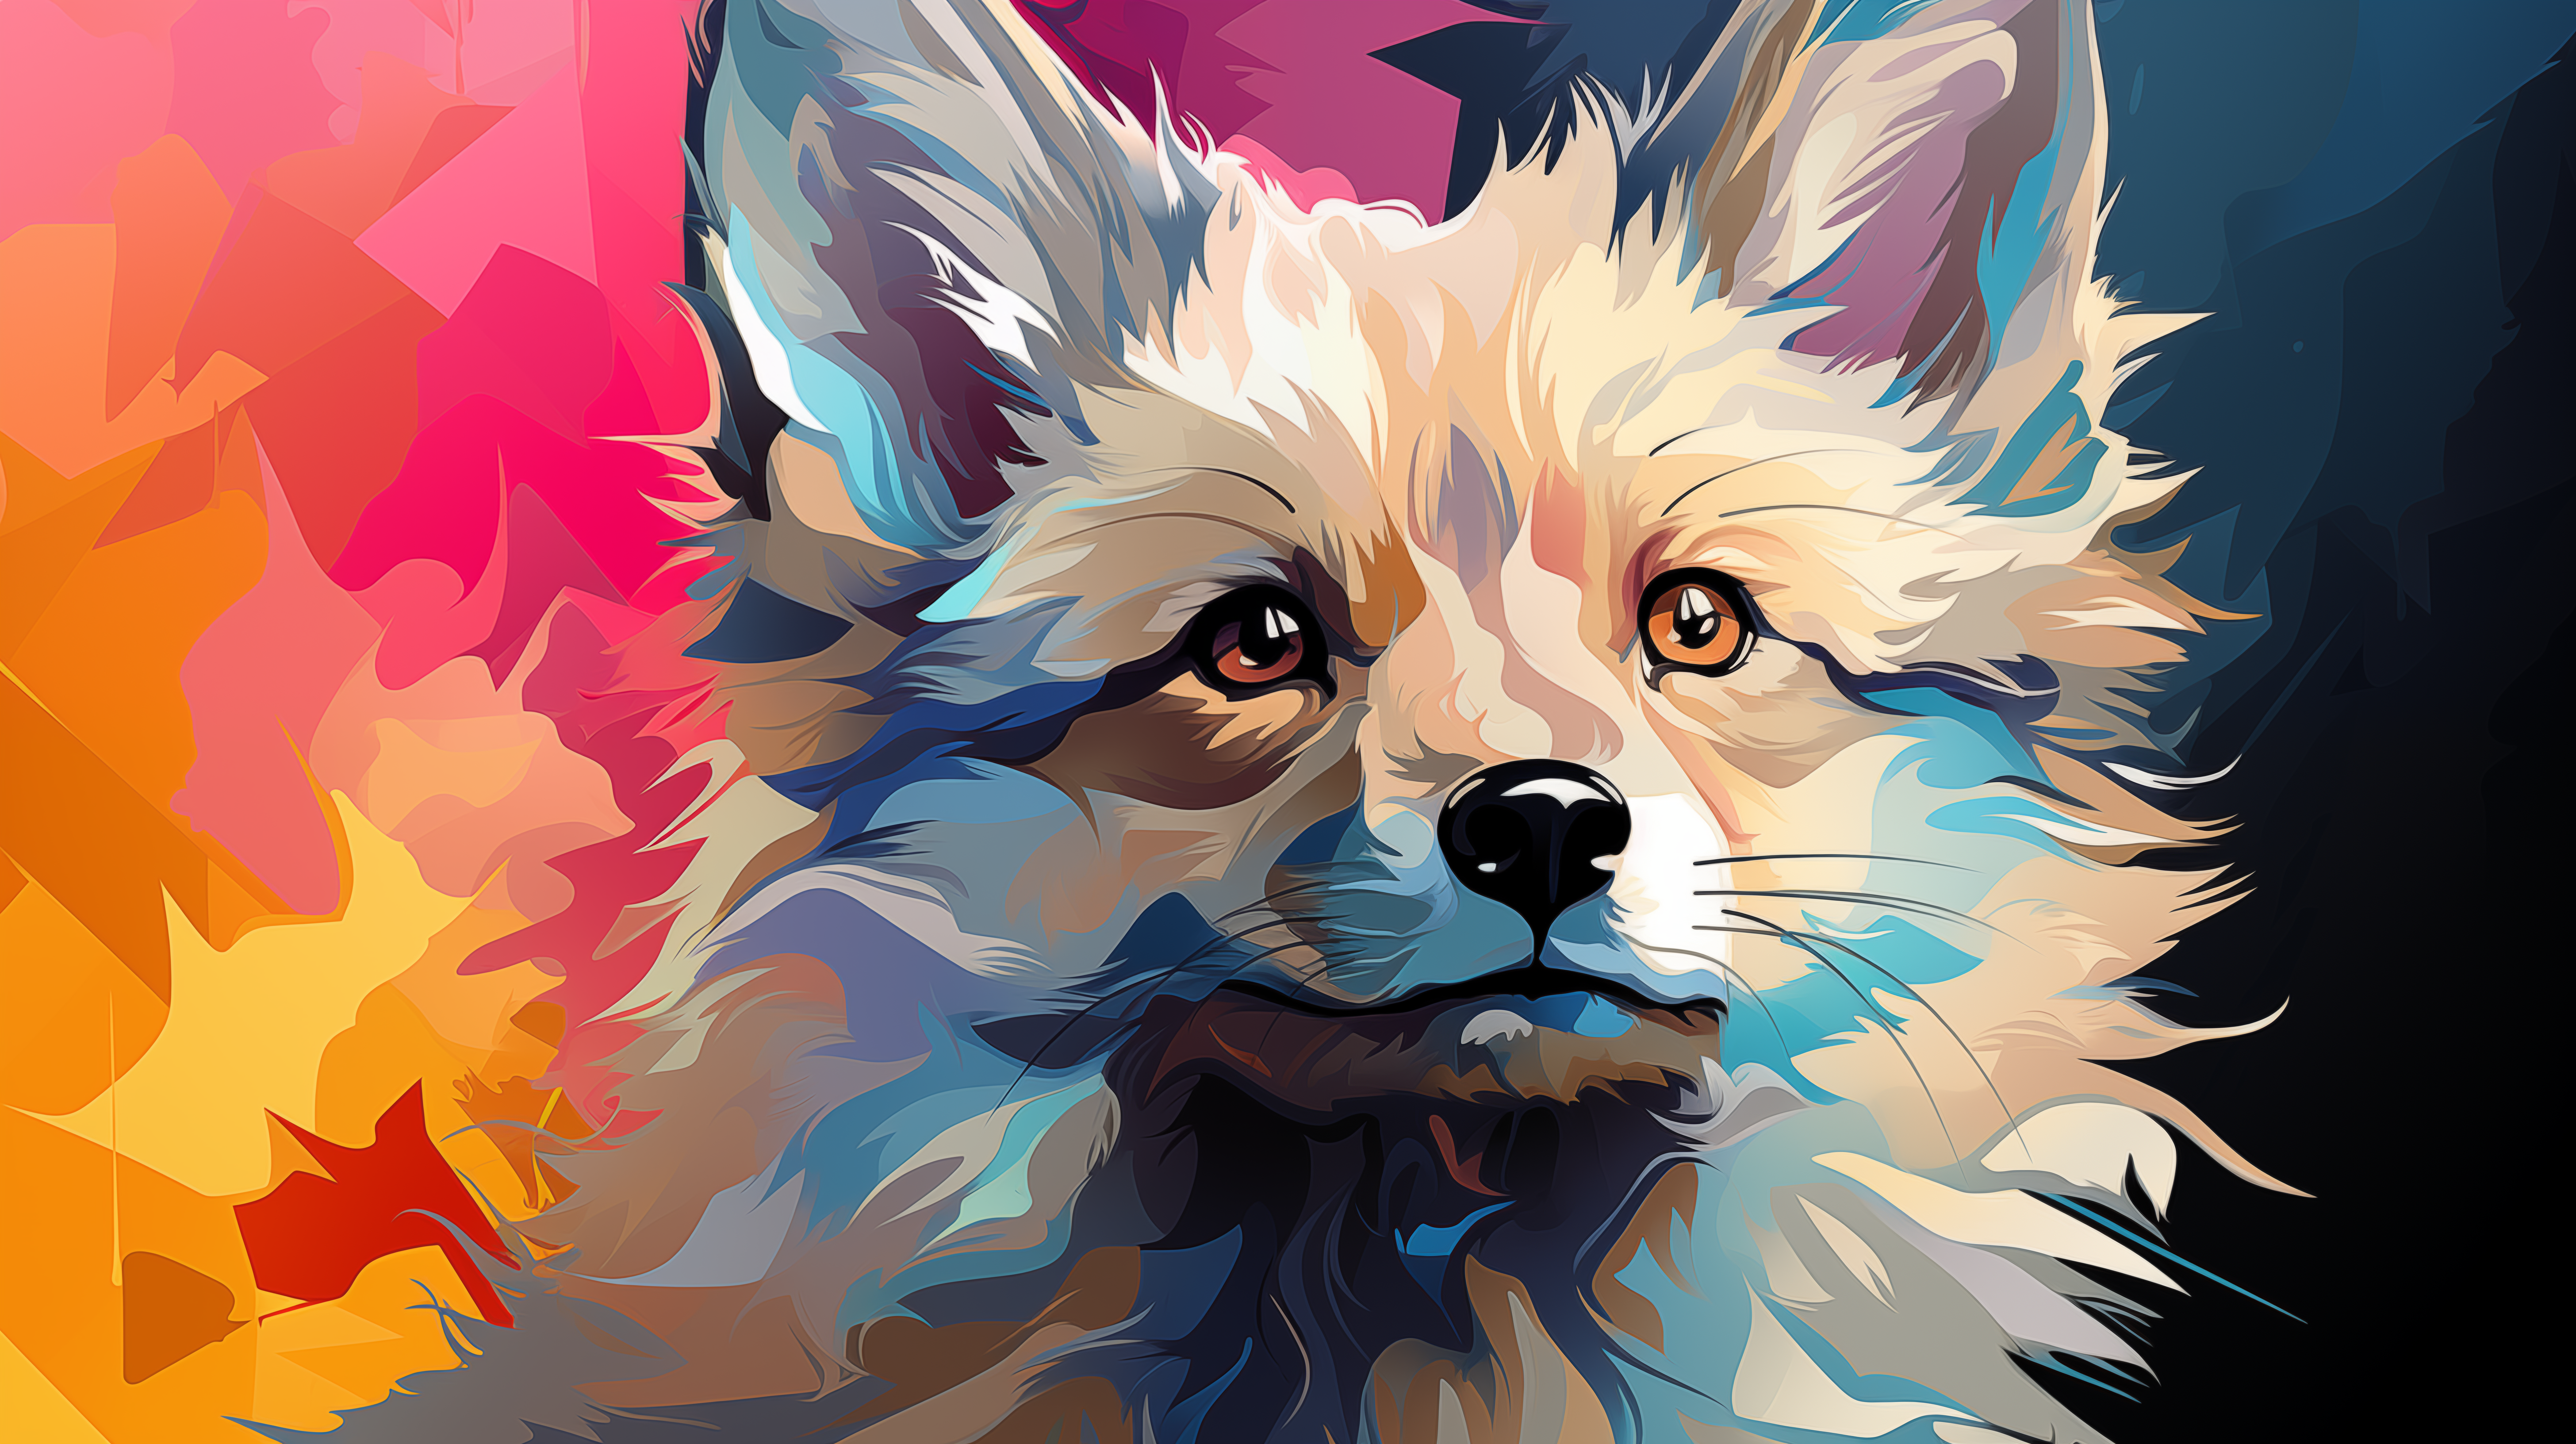 Colorful pop art-style fox HD desktop wallpaper and background.